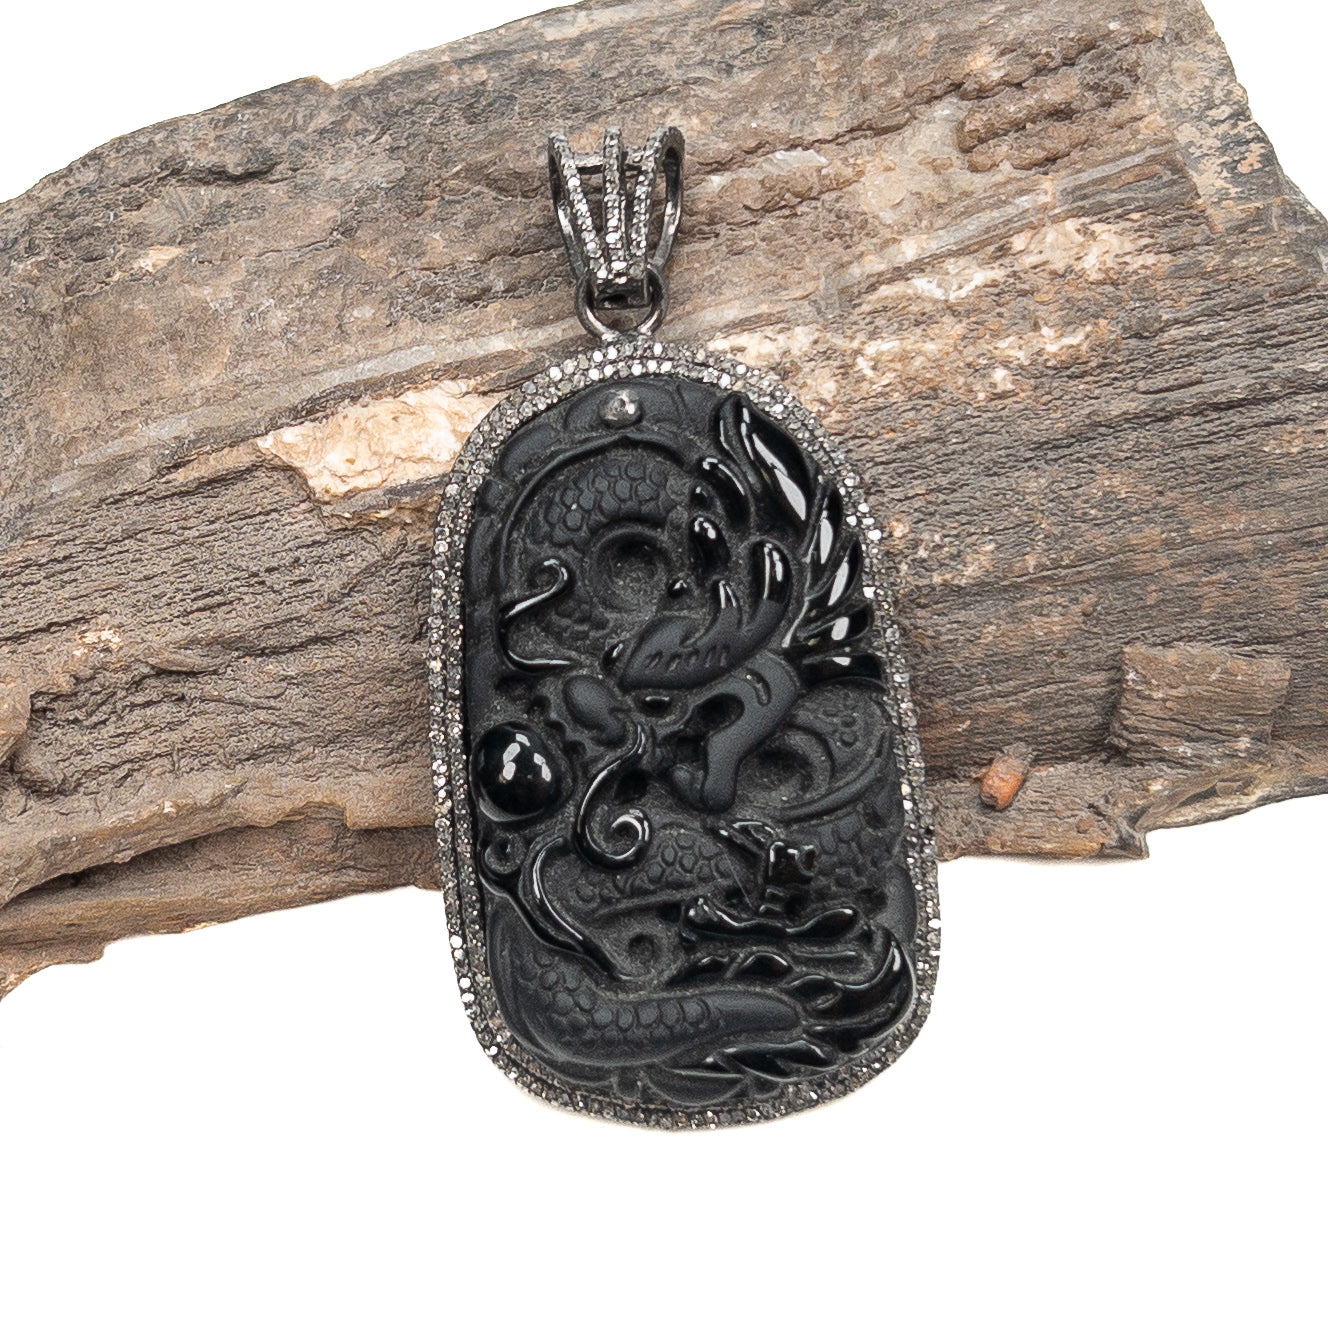 Carved Black Obsidian Dragon Pendant with Diamond (Oxidized Sterling Silver) - 1 pc.